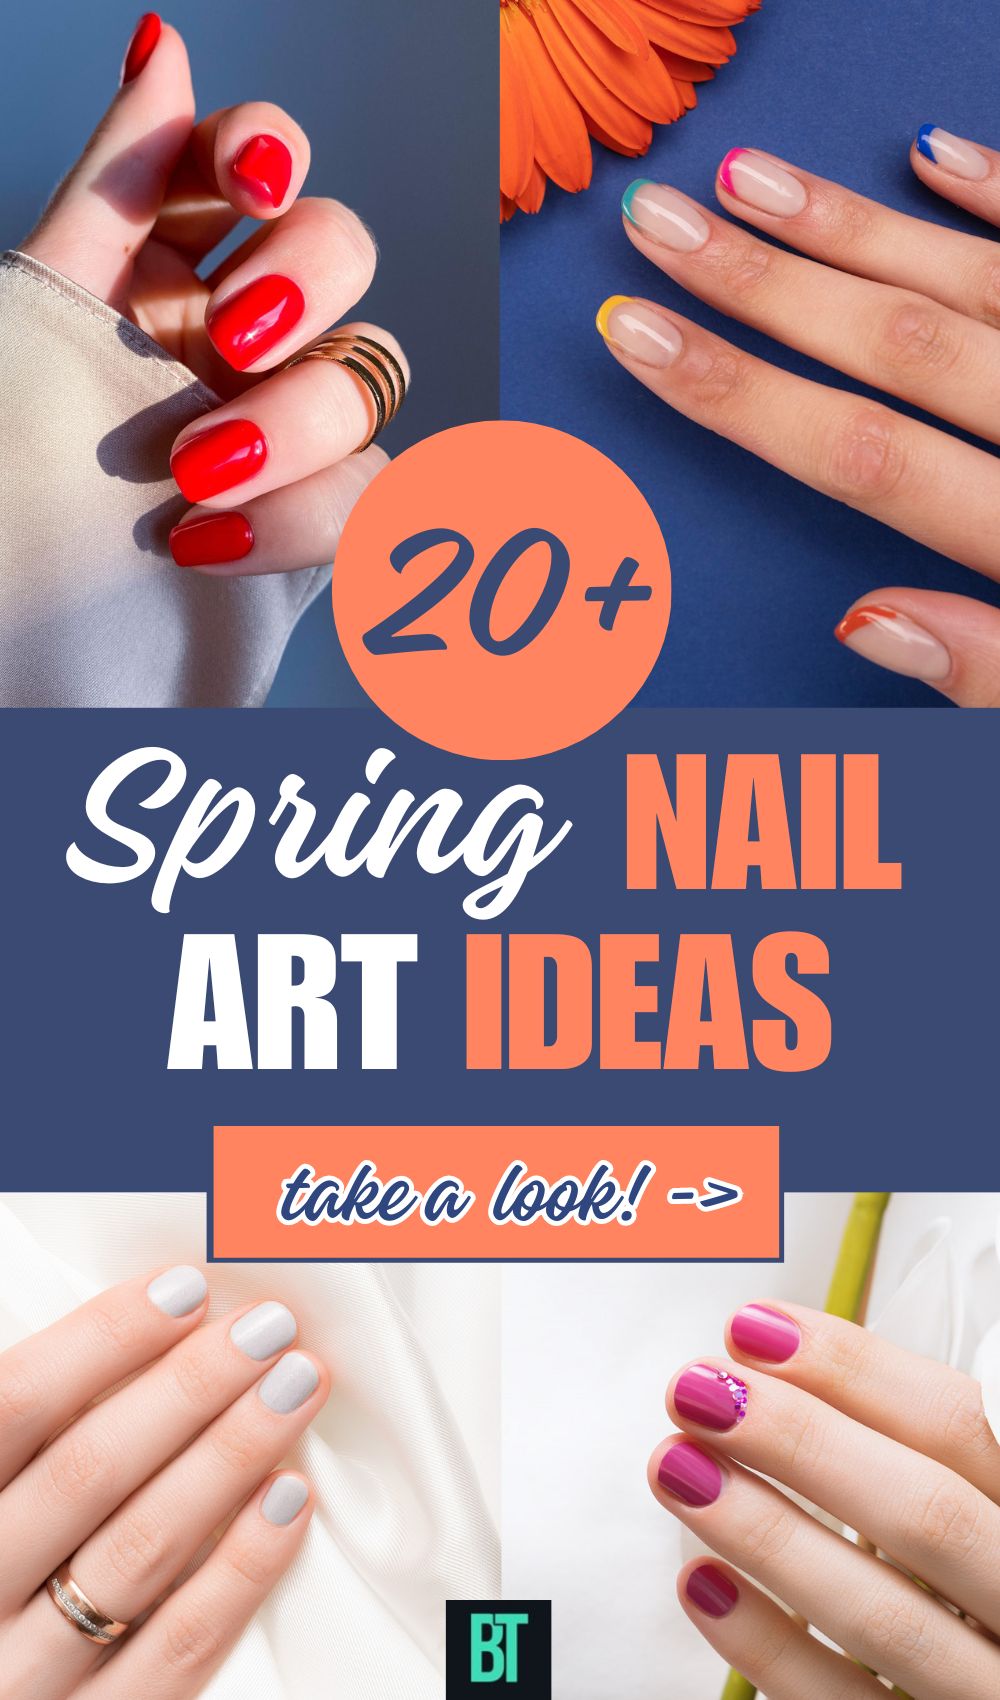 20+ Nail Art Ideas for Spring